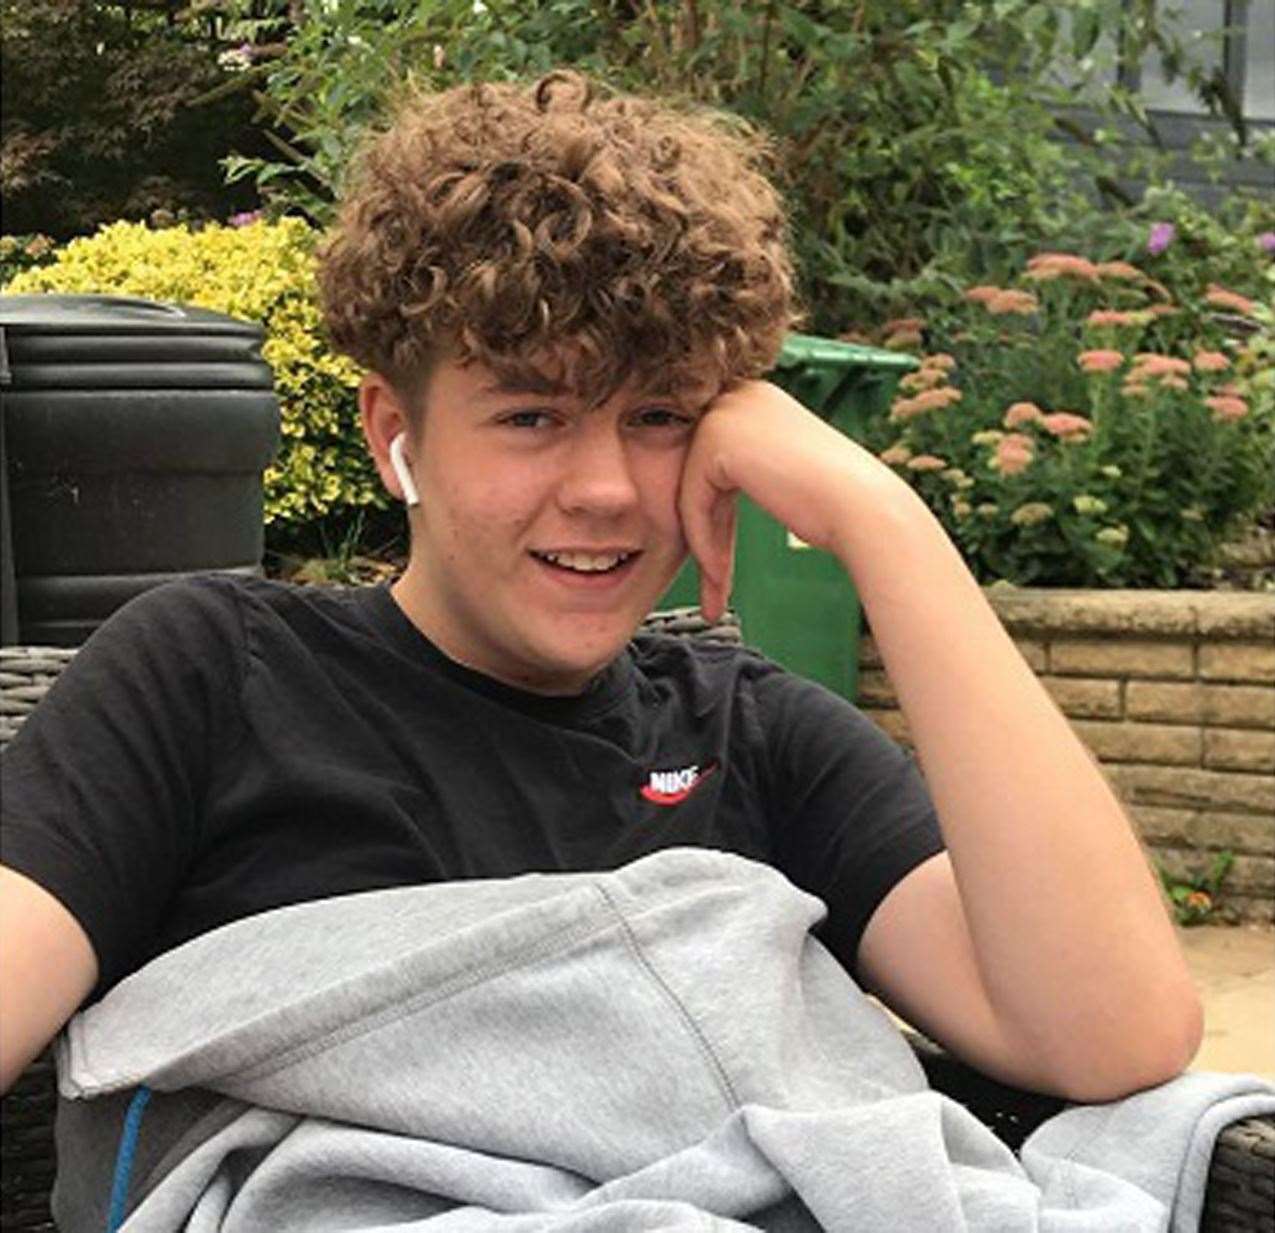 Olly Stephens was stabbed and killed near his home after being lured to a park by a teenage girl (Thames Valley Police/PA)